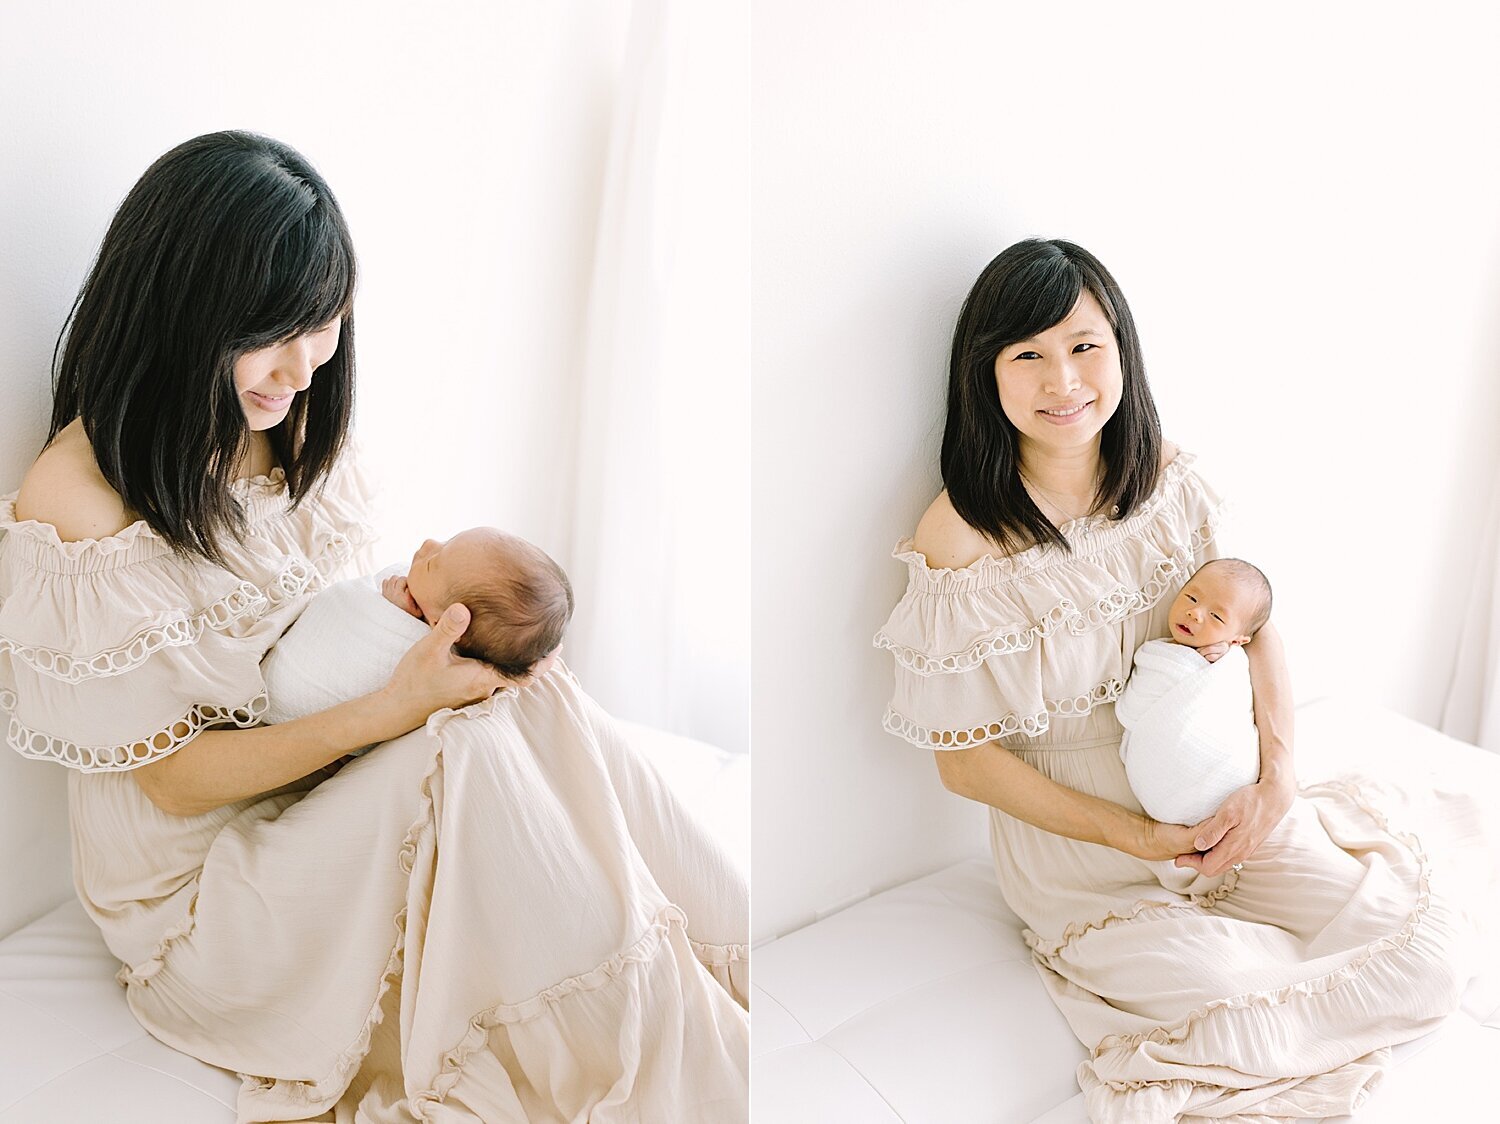 Mom sitting down with her newborn son. Photos by Ambre Williams Photography.